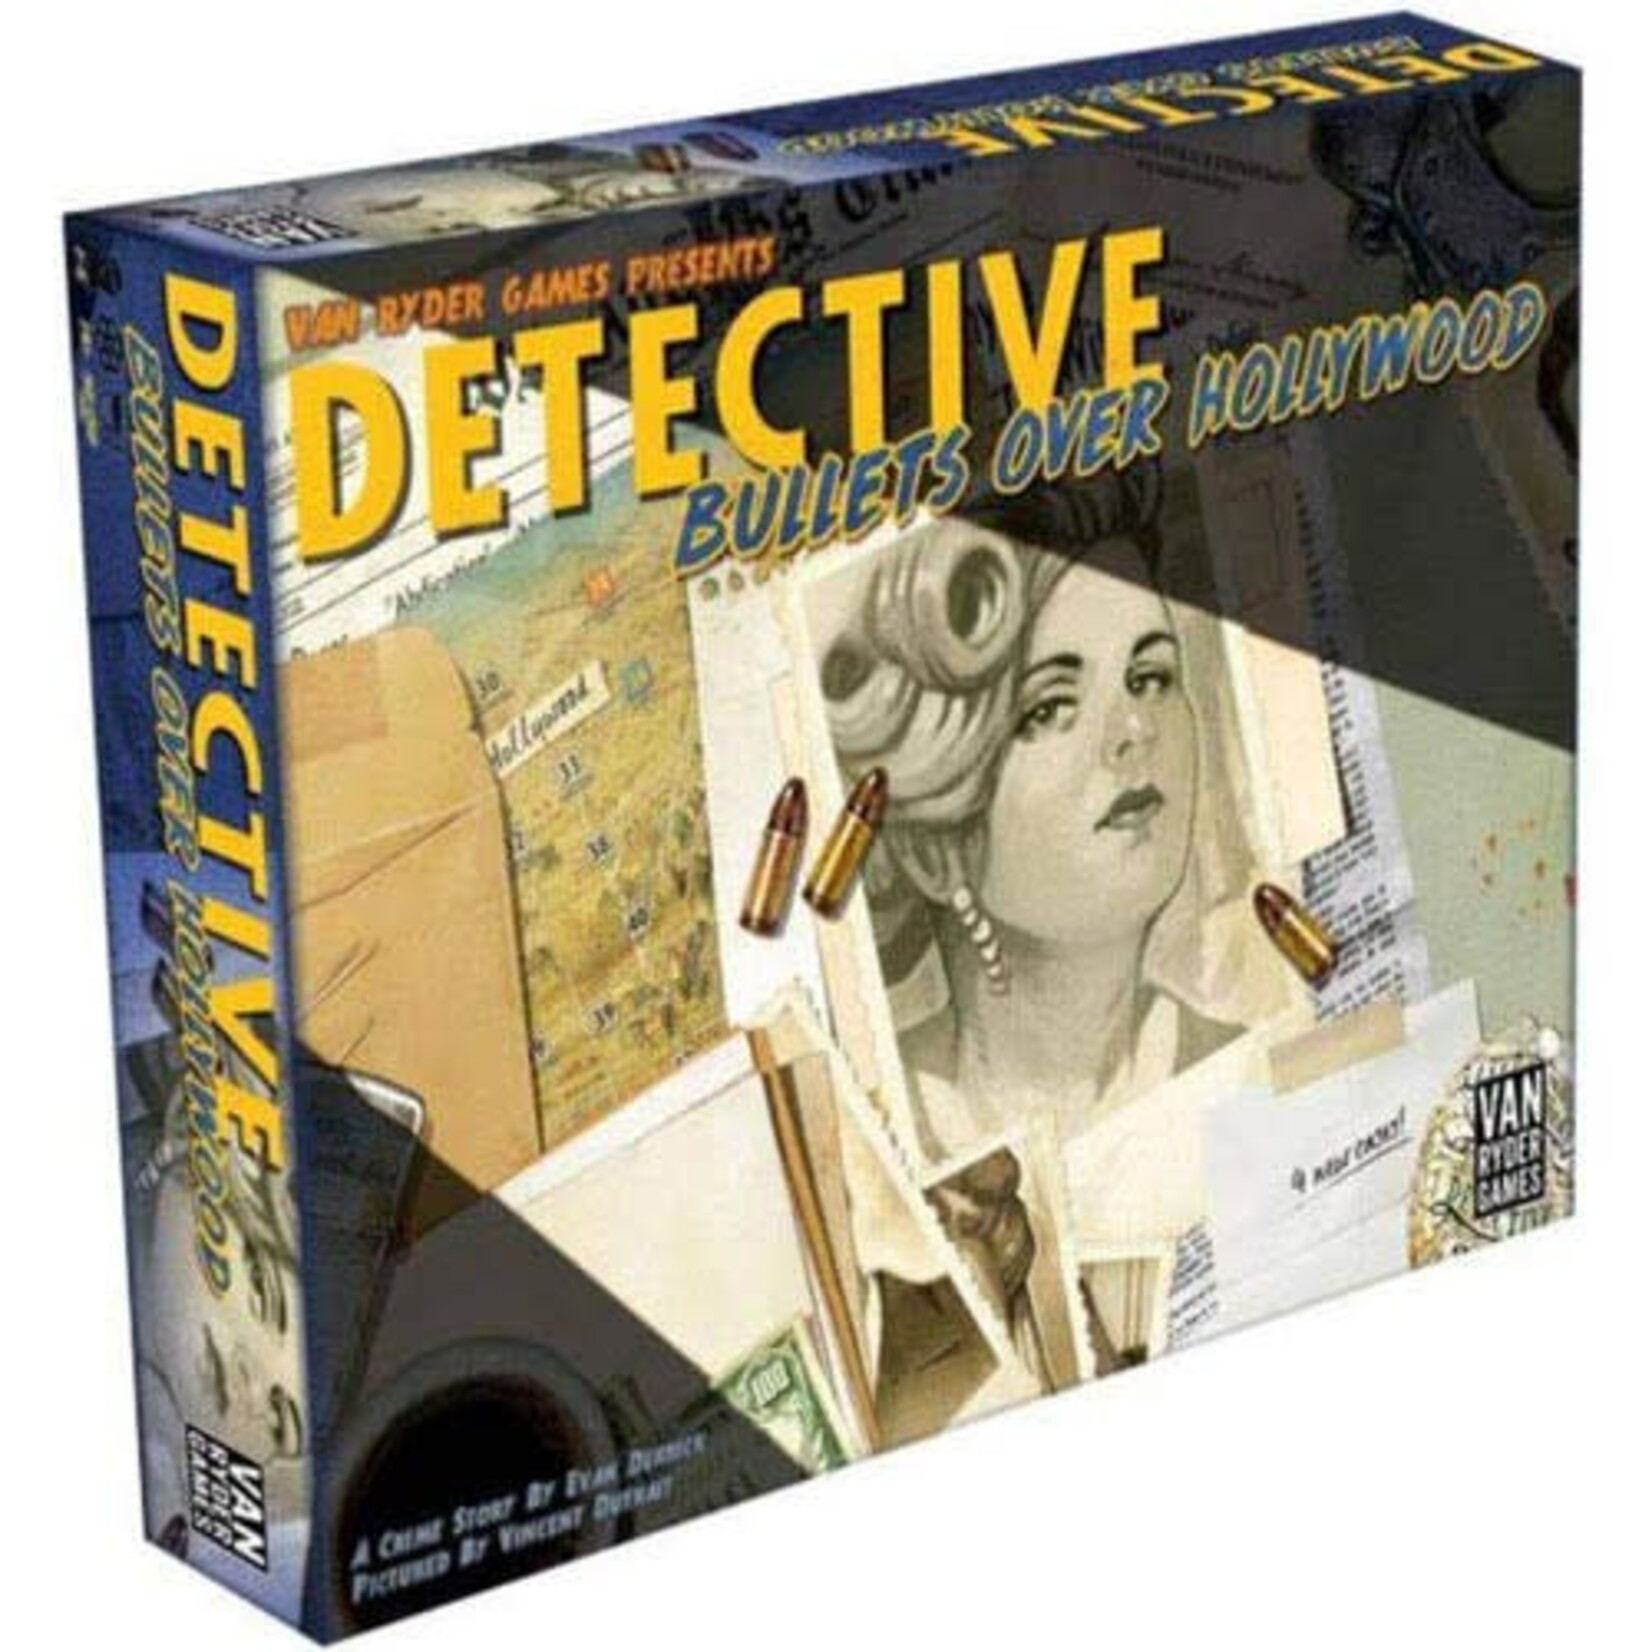 Detective - City of Angels Board Game Bullets Over Hollywood Expansion